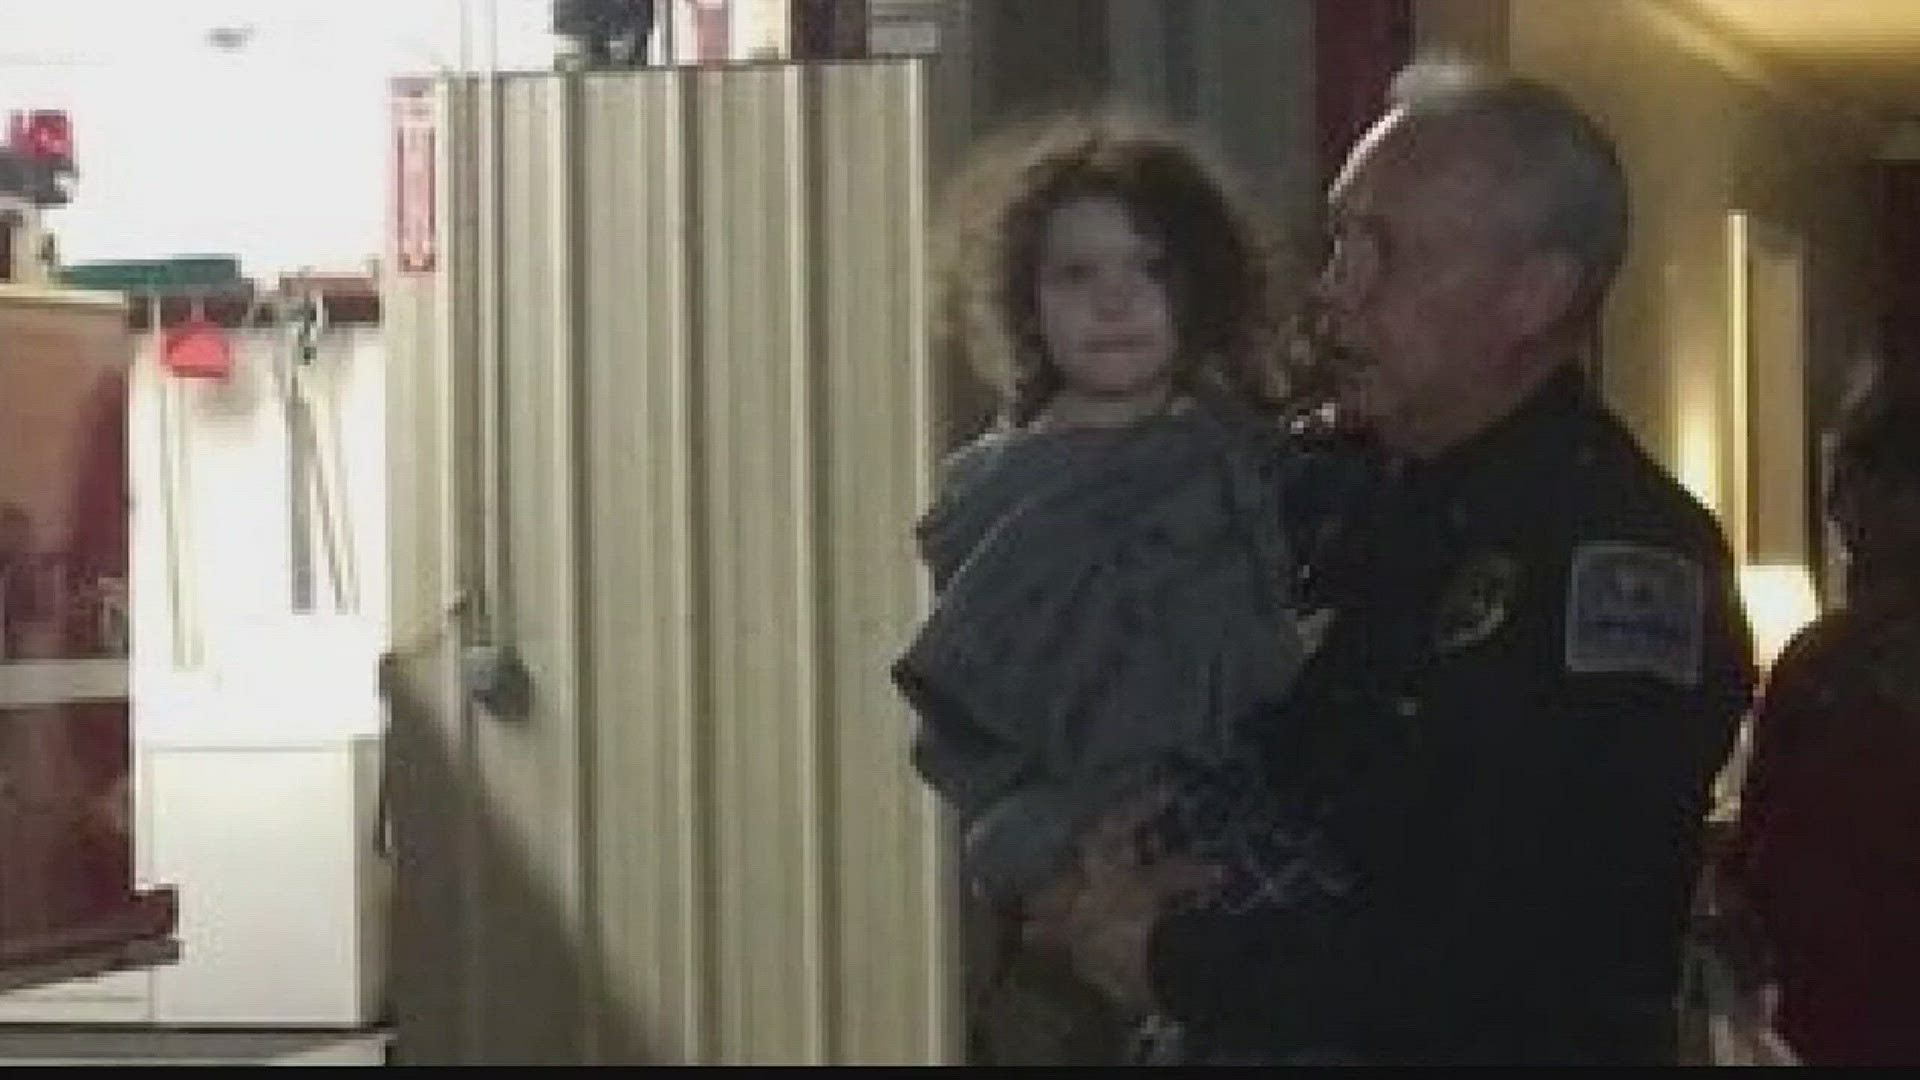 Four-year-old Heidi Todd was found safe tonight in Alabama, the Charleston toddler had been missing since last night.